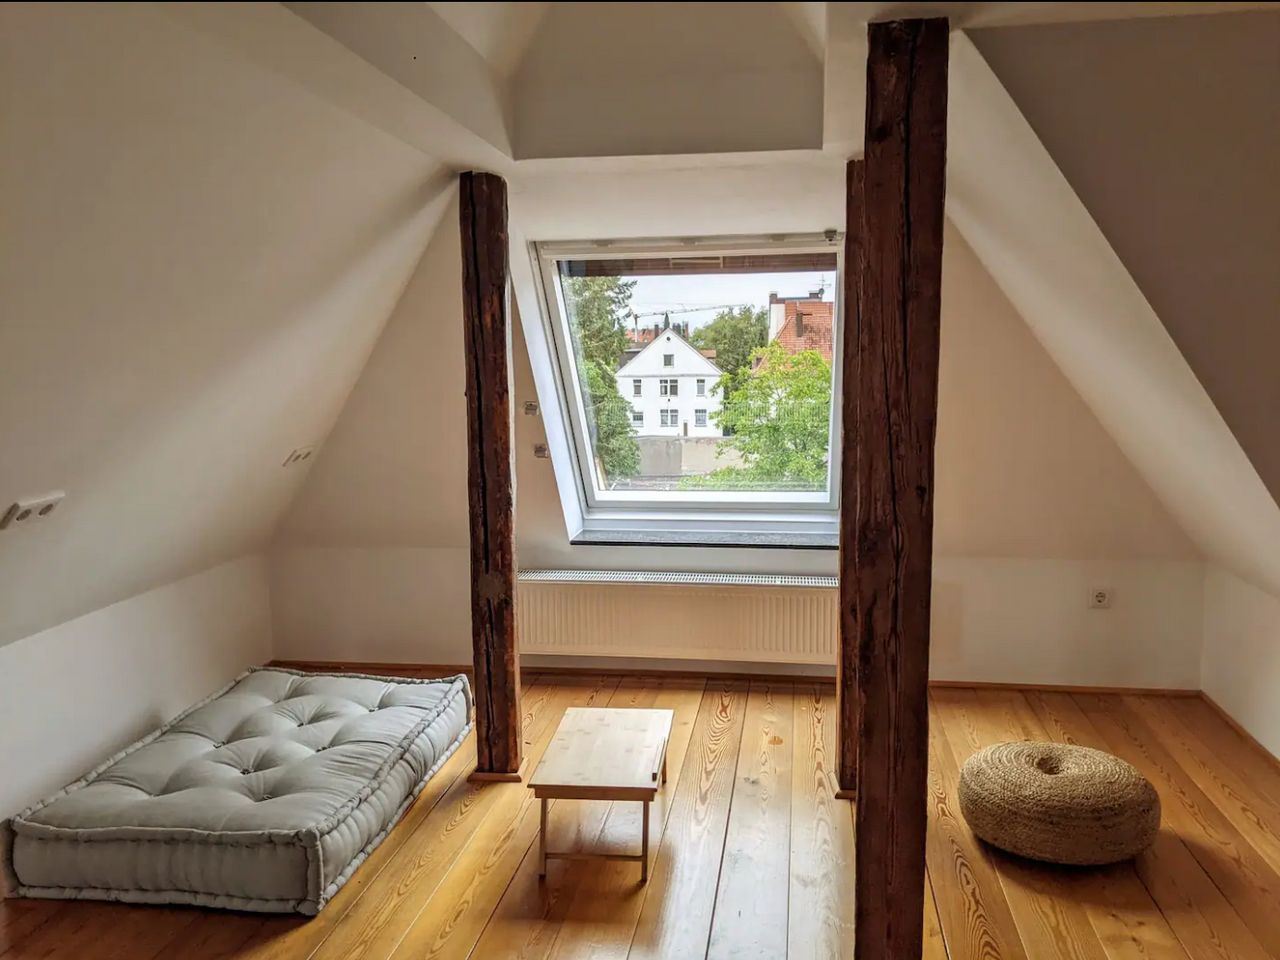 Beautiful, central apartment with a view over Bielefeld rooftops